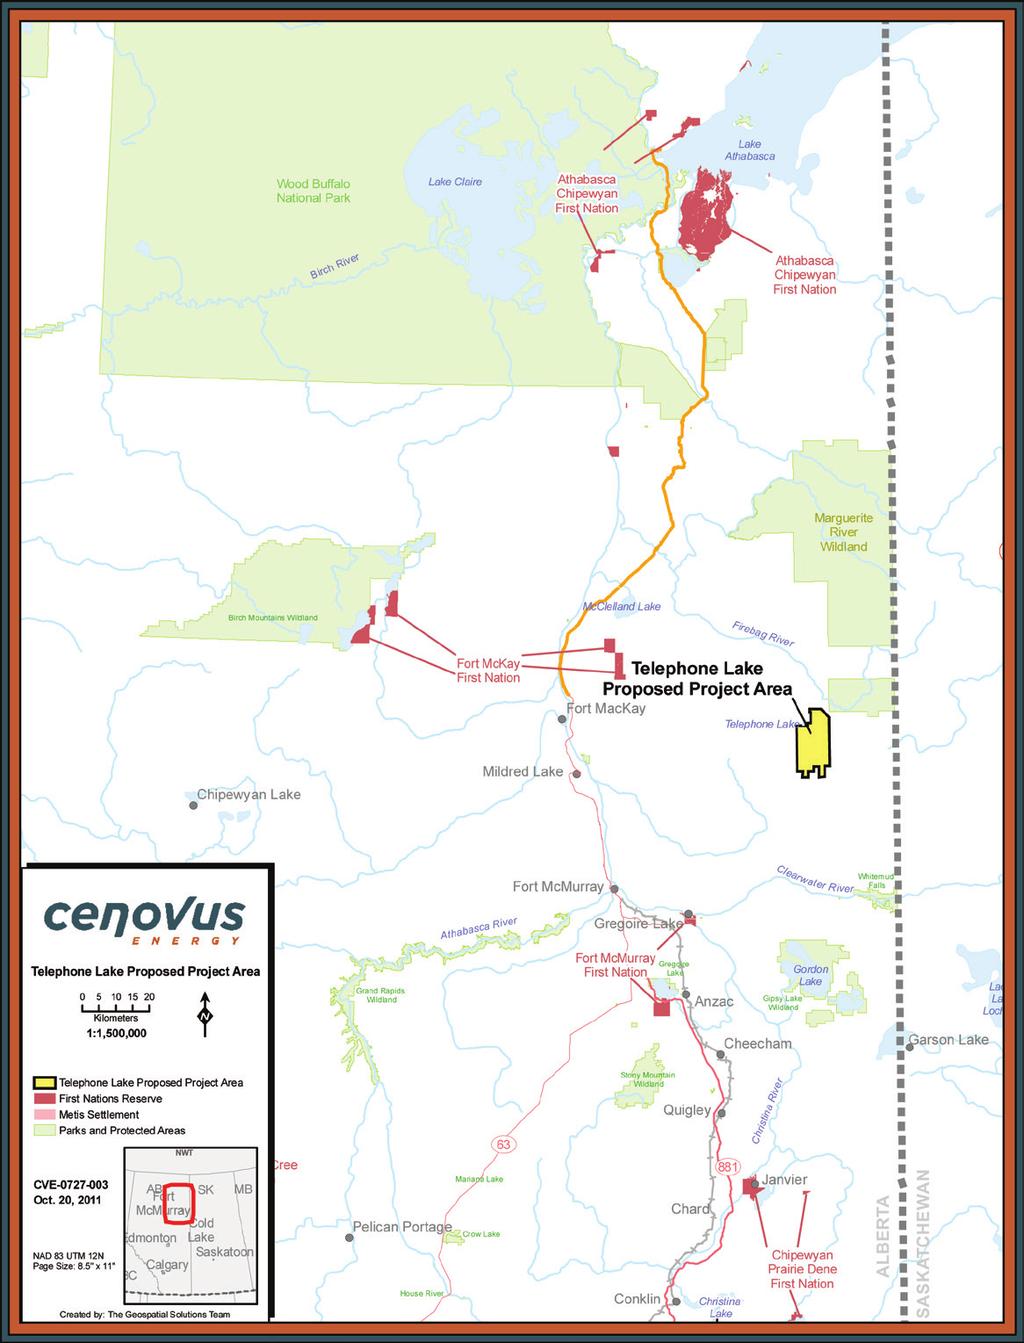 Cenovus has received regulatory approval for the proposed Telephone Lake Project (the Project).